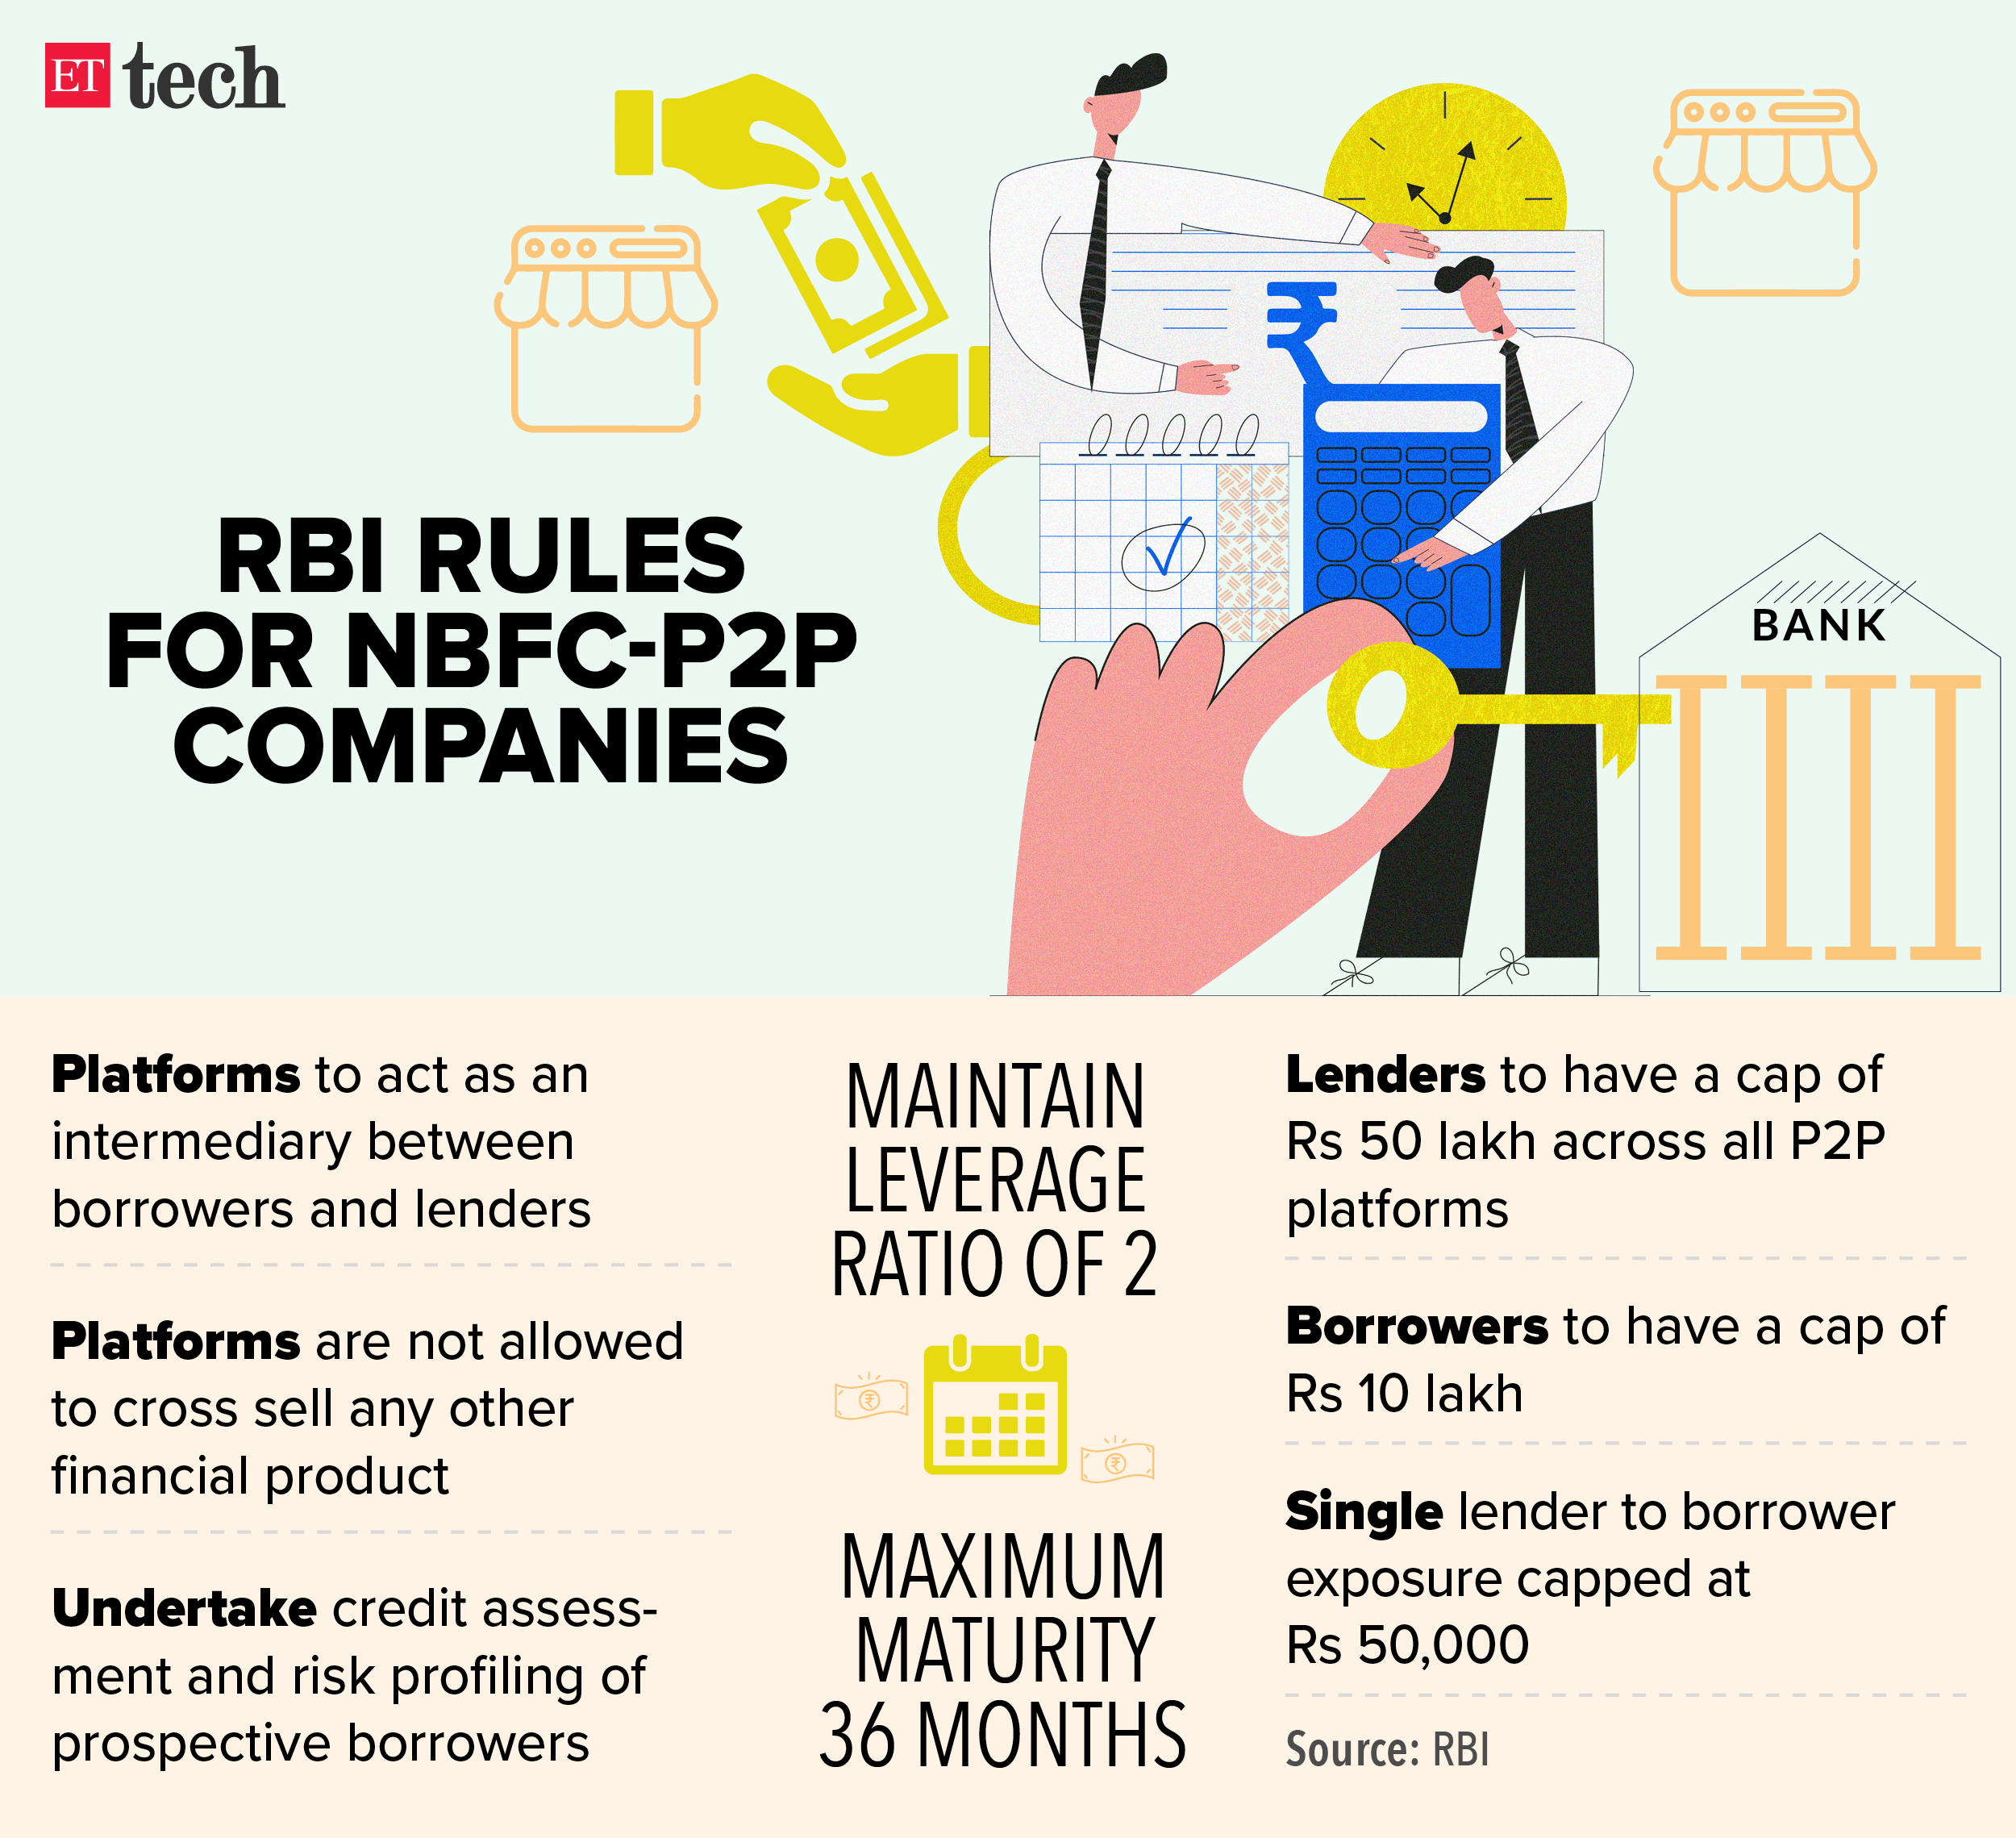 RBI rules for NBFC P2P companies